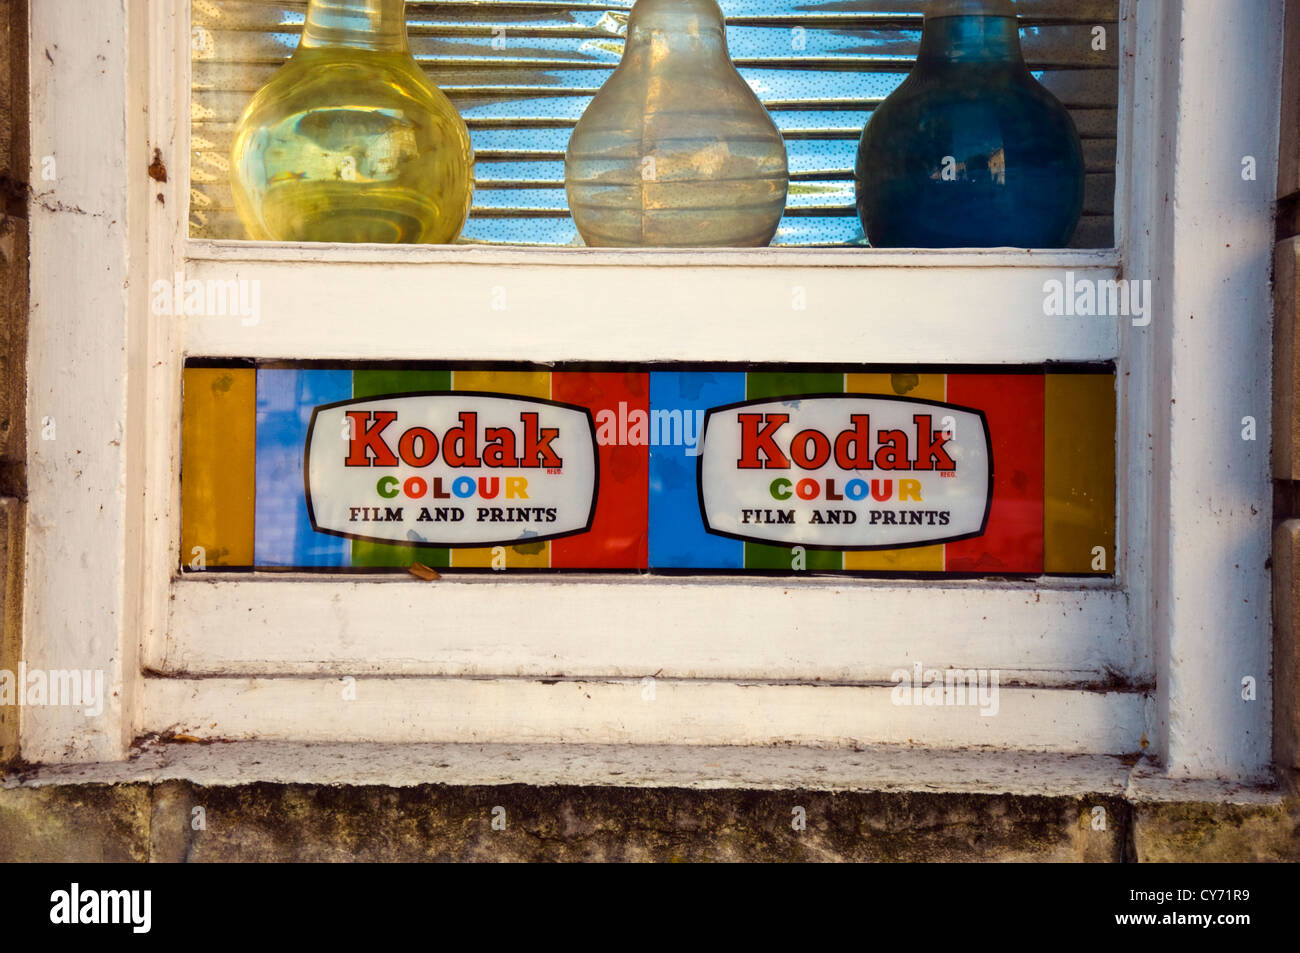 Old advertisement for Kodak films and prints in a chemists window Stock Photo